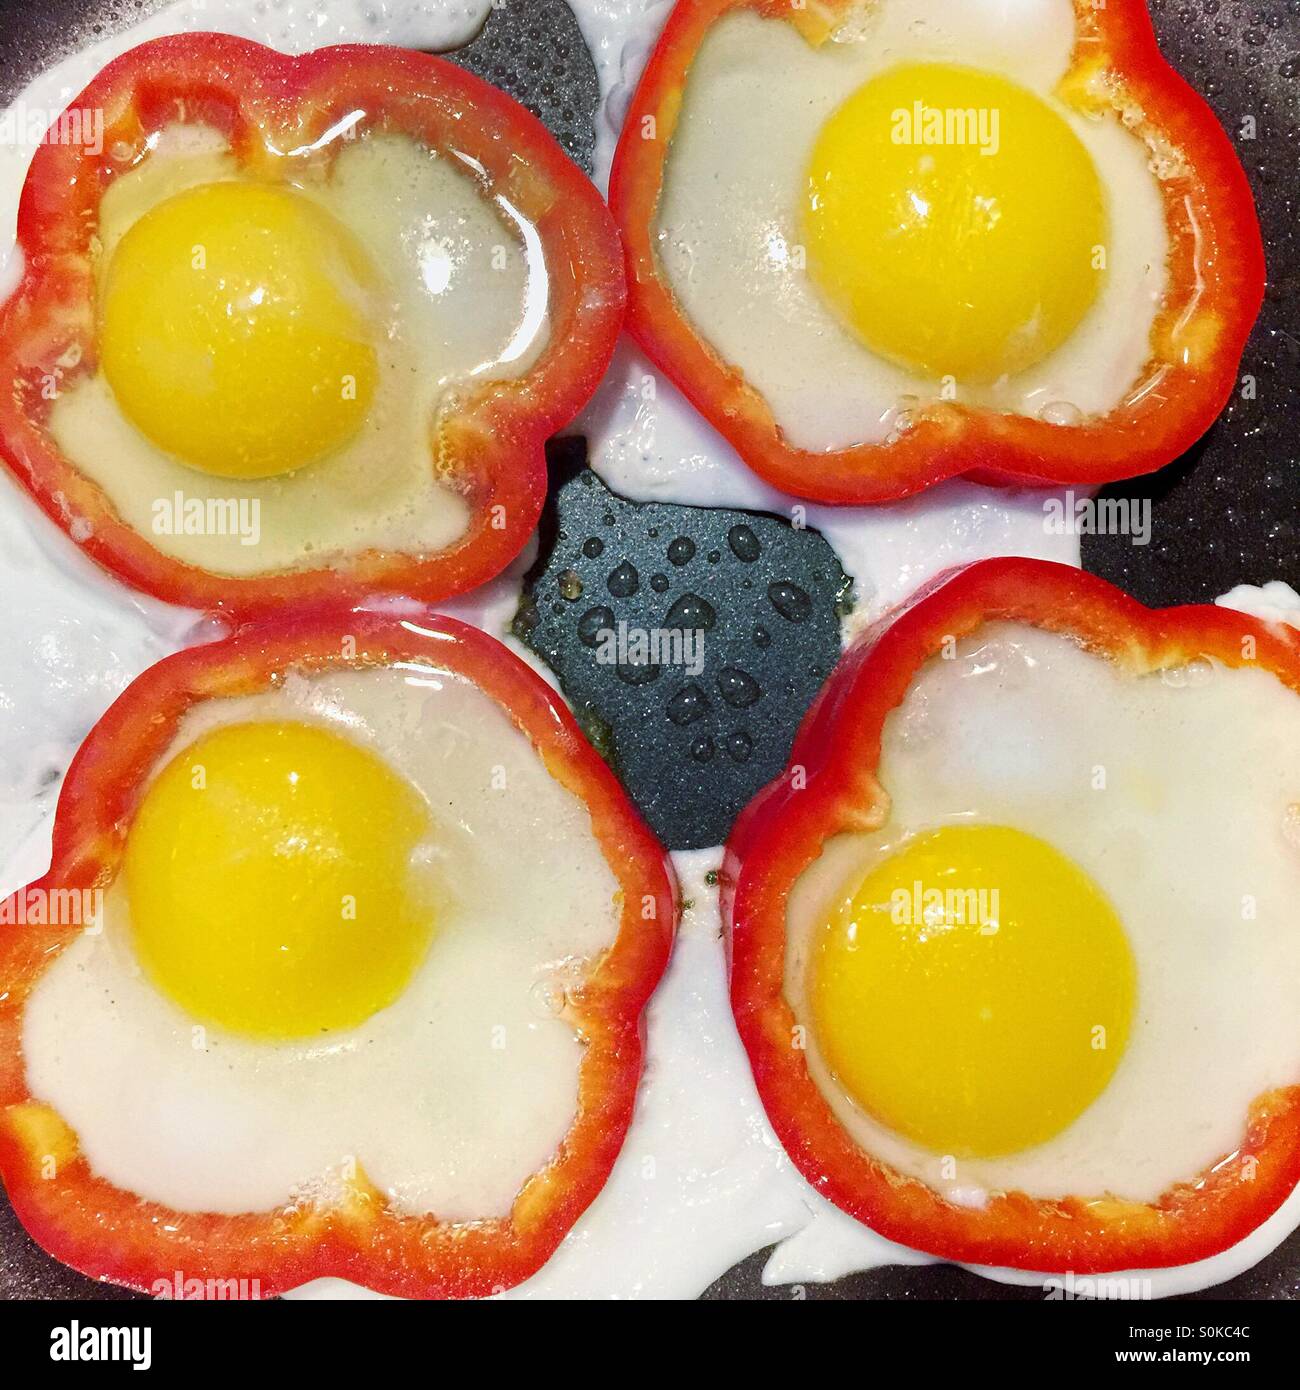 https://c8.alamy.com/comp/S0KC4C/four-sunny-side-up-eggs-cooking-inside-slices-of-red-peppers-S0KC4C.jpg